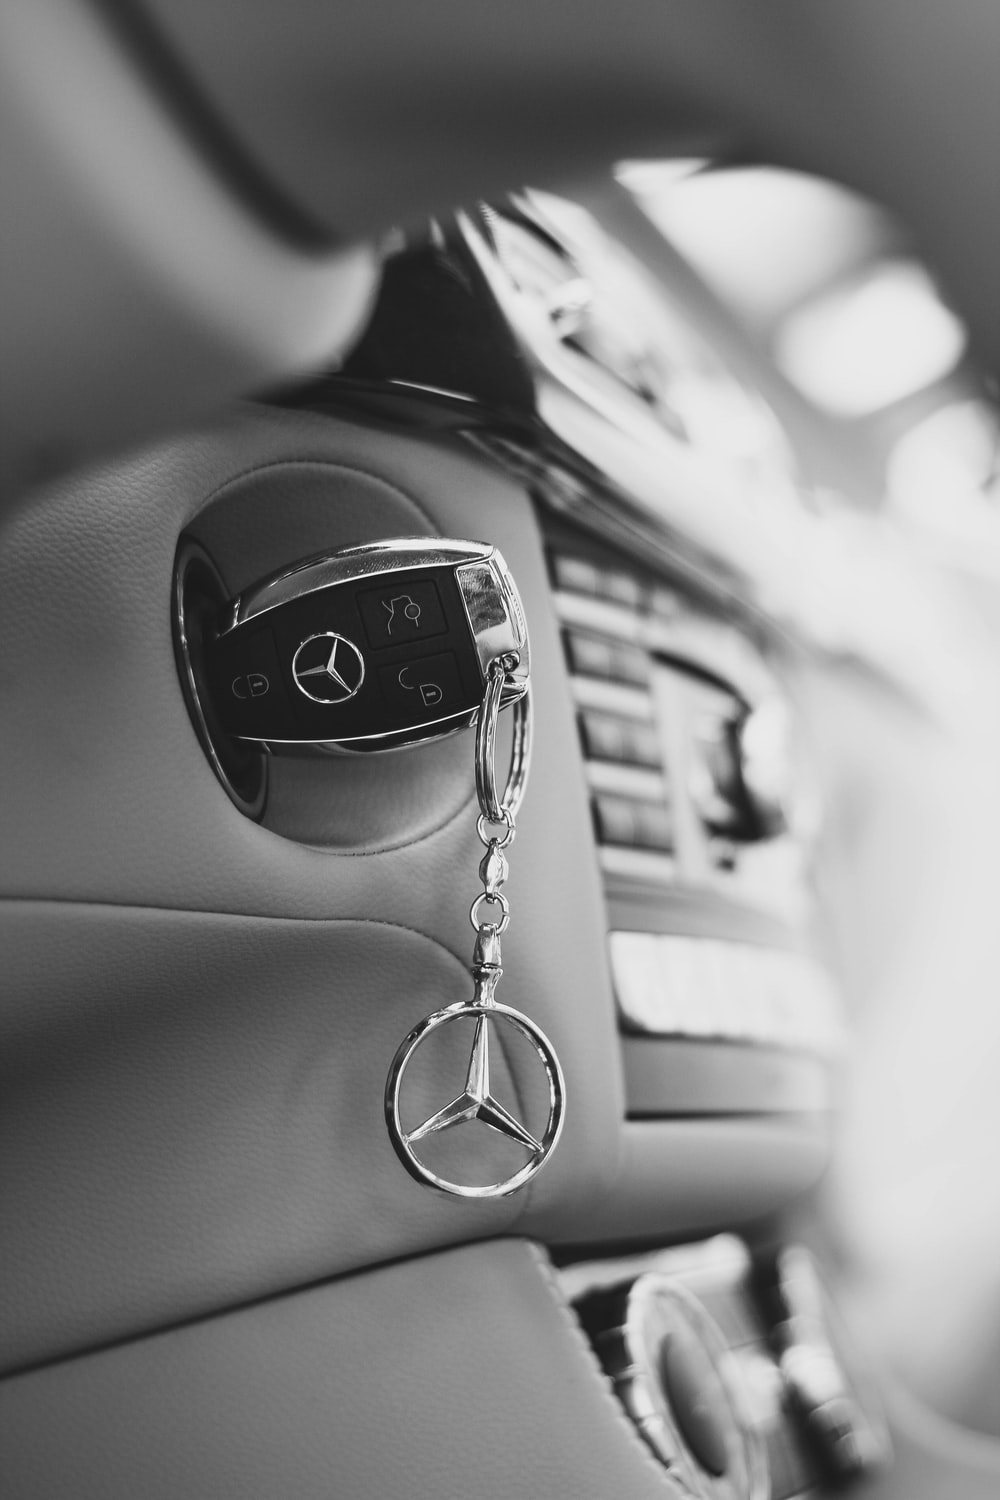 Keychain Picture [HD]. Download Free Image